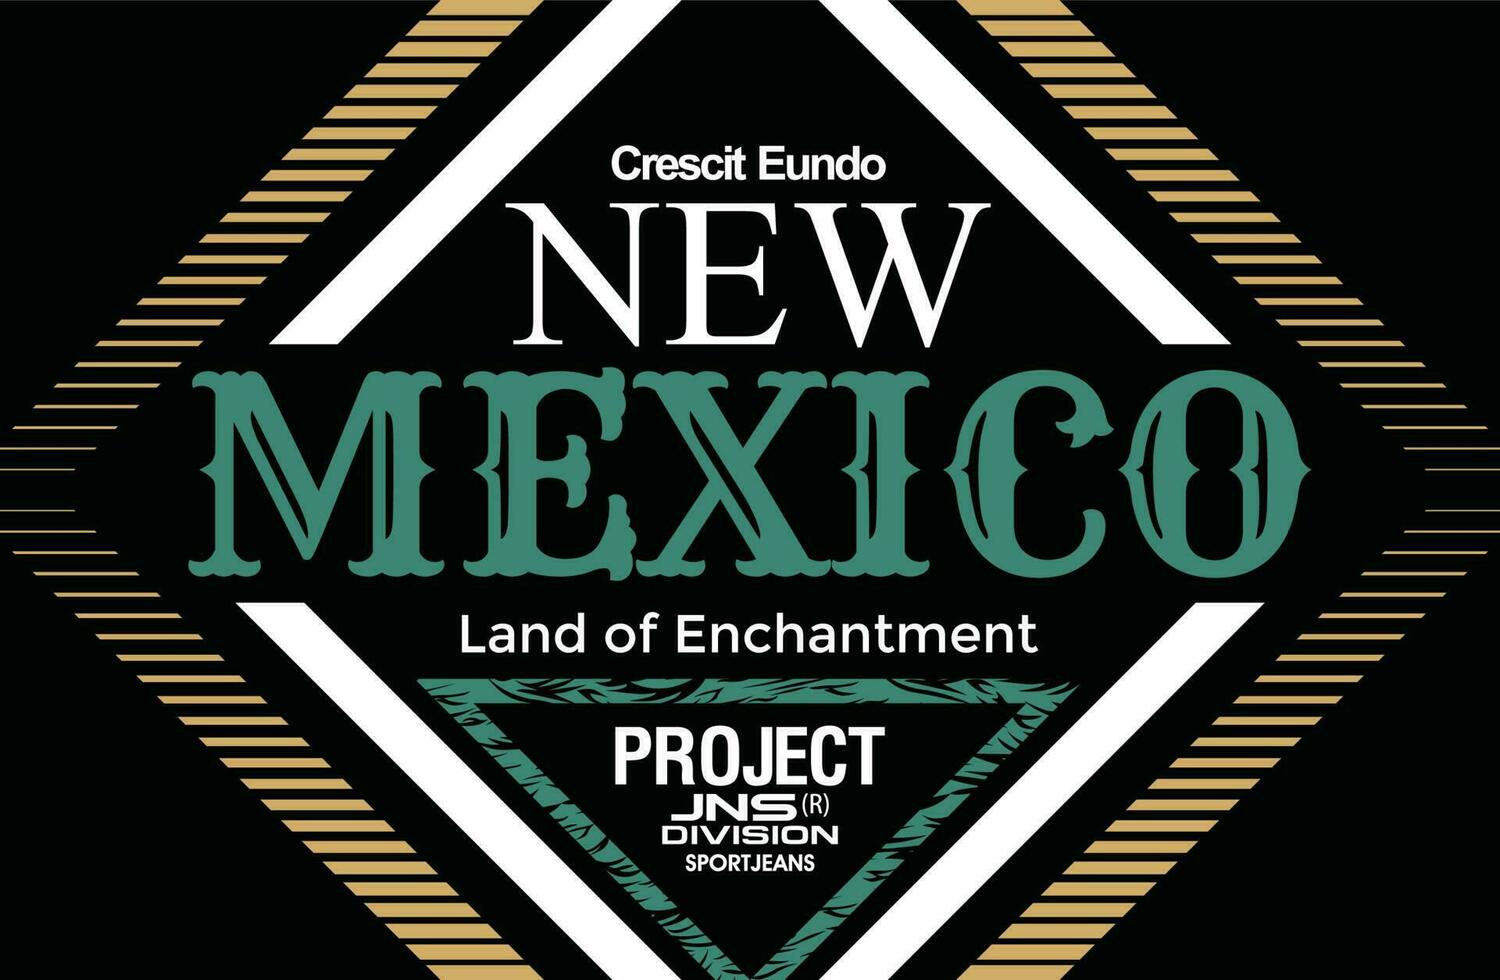 New mexico Lettering hands typography graphic design in vector illustration.